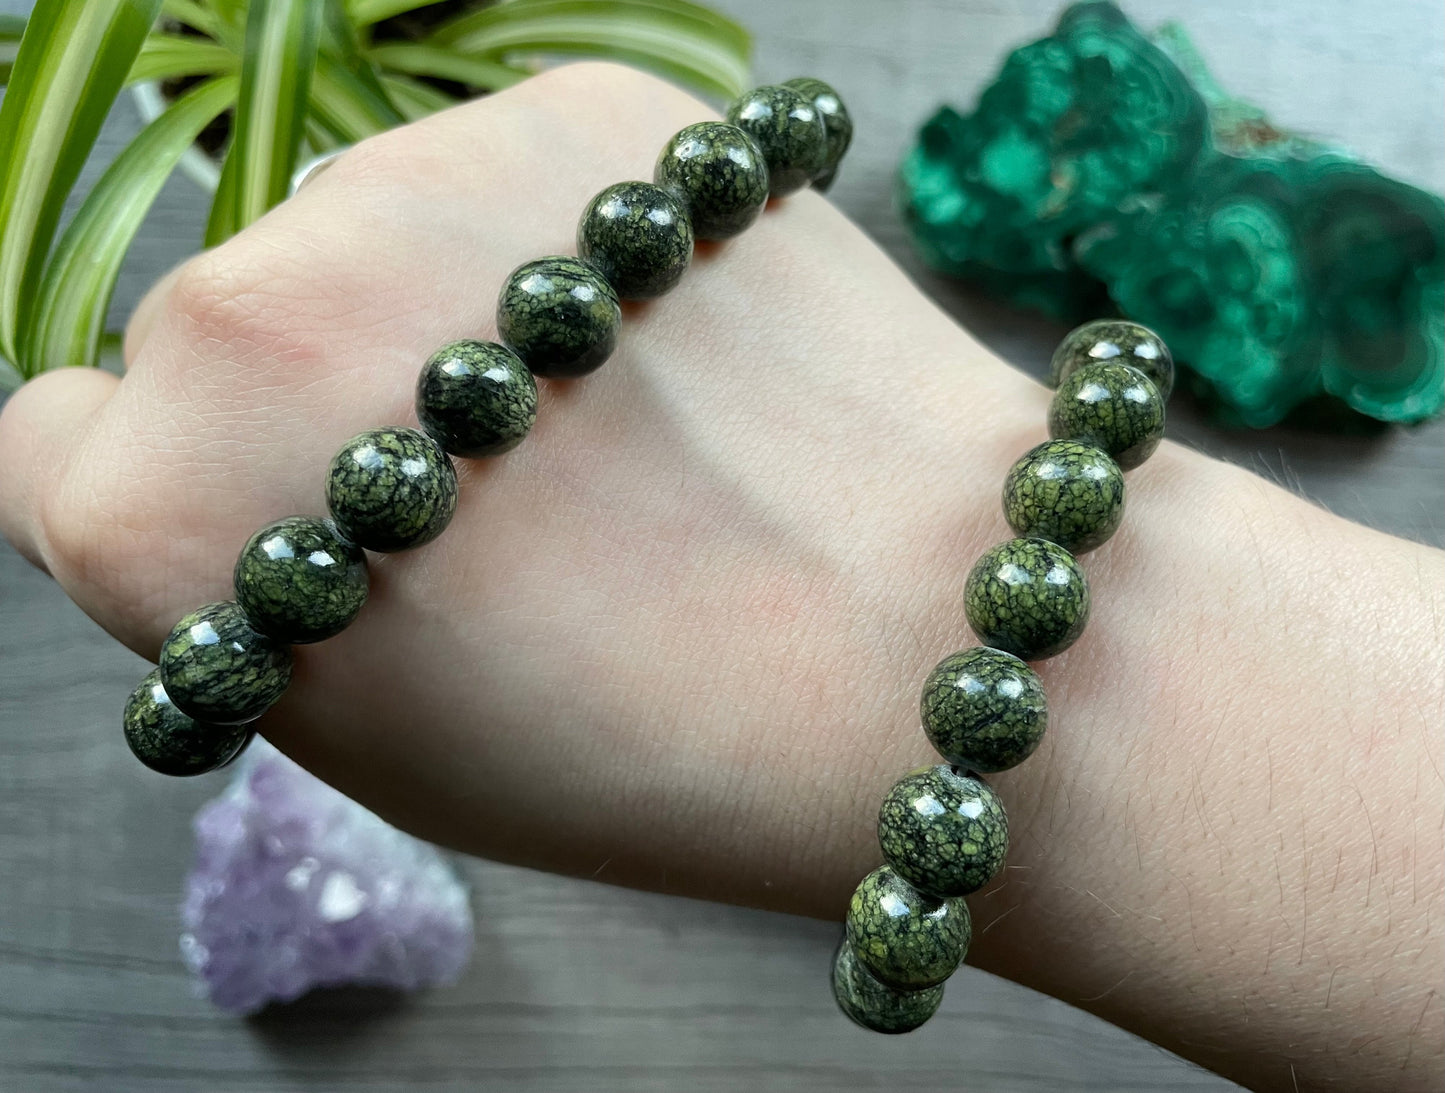 Pictured is a serpentine bead bracelet.